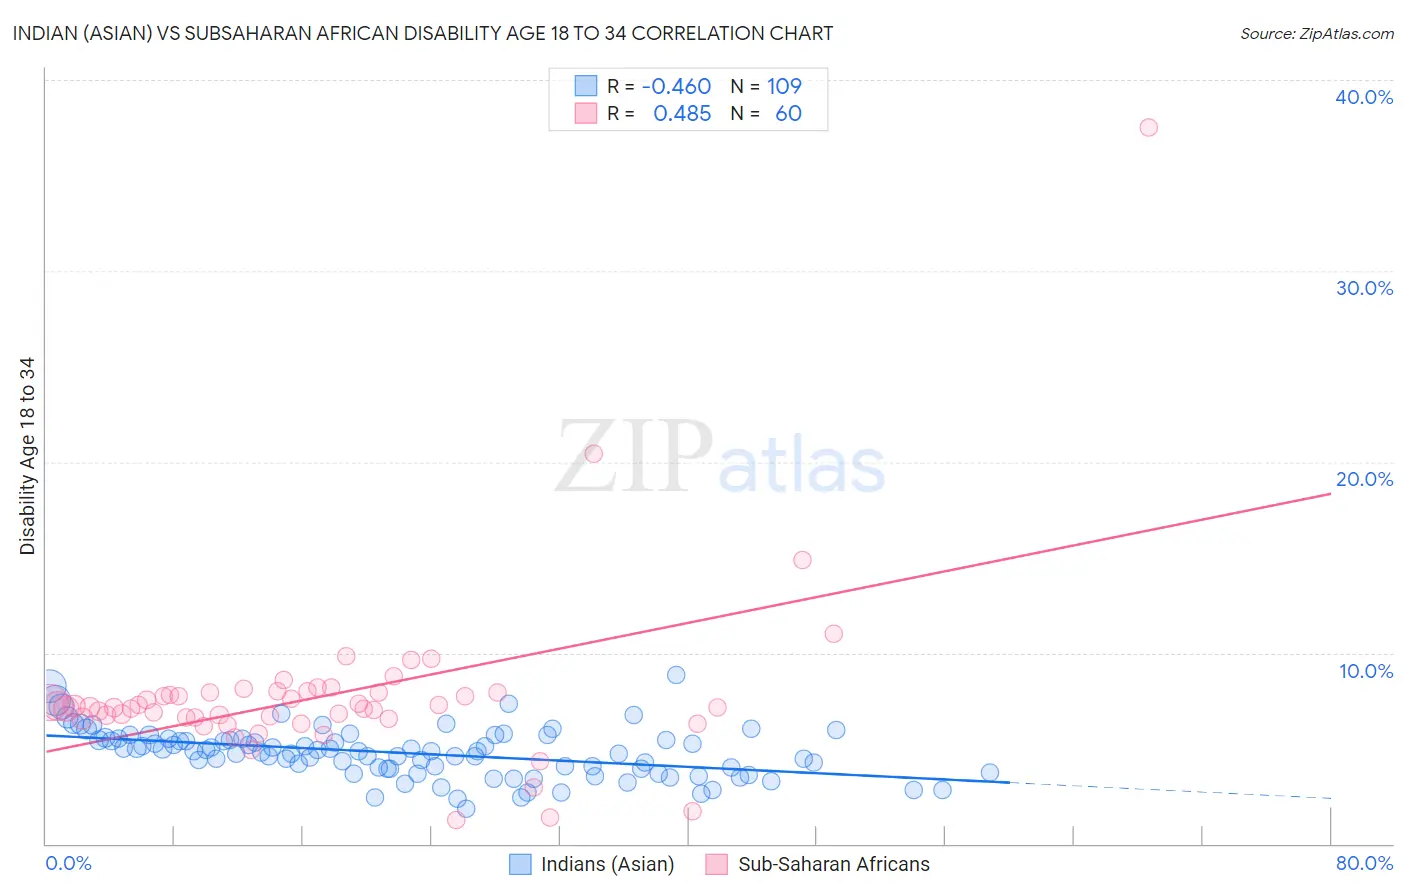 Indian (Asian) vs Subsaharan African Disability Age 18 to 34